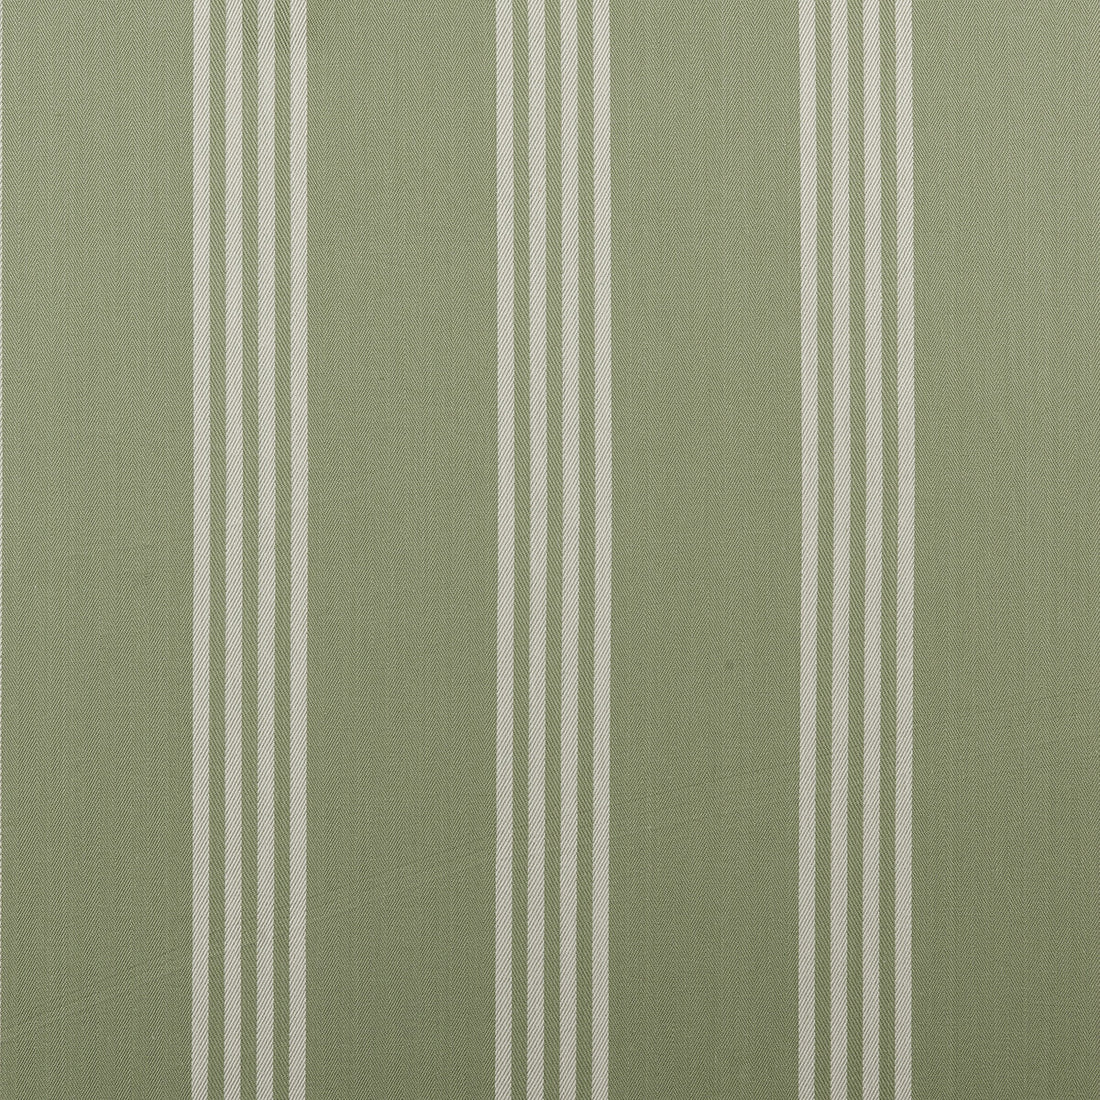 Marlow fabric in sage color - pattern F0422/06.CAC.0 - by Clarke And Clarke in the Clarke &amp; Clarke Ticking Stripes collection